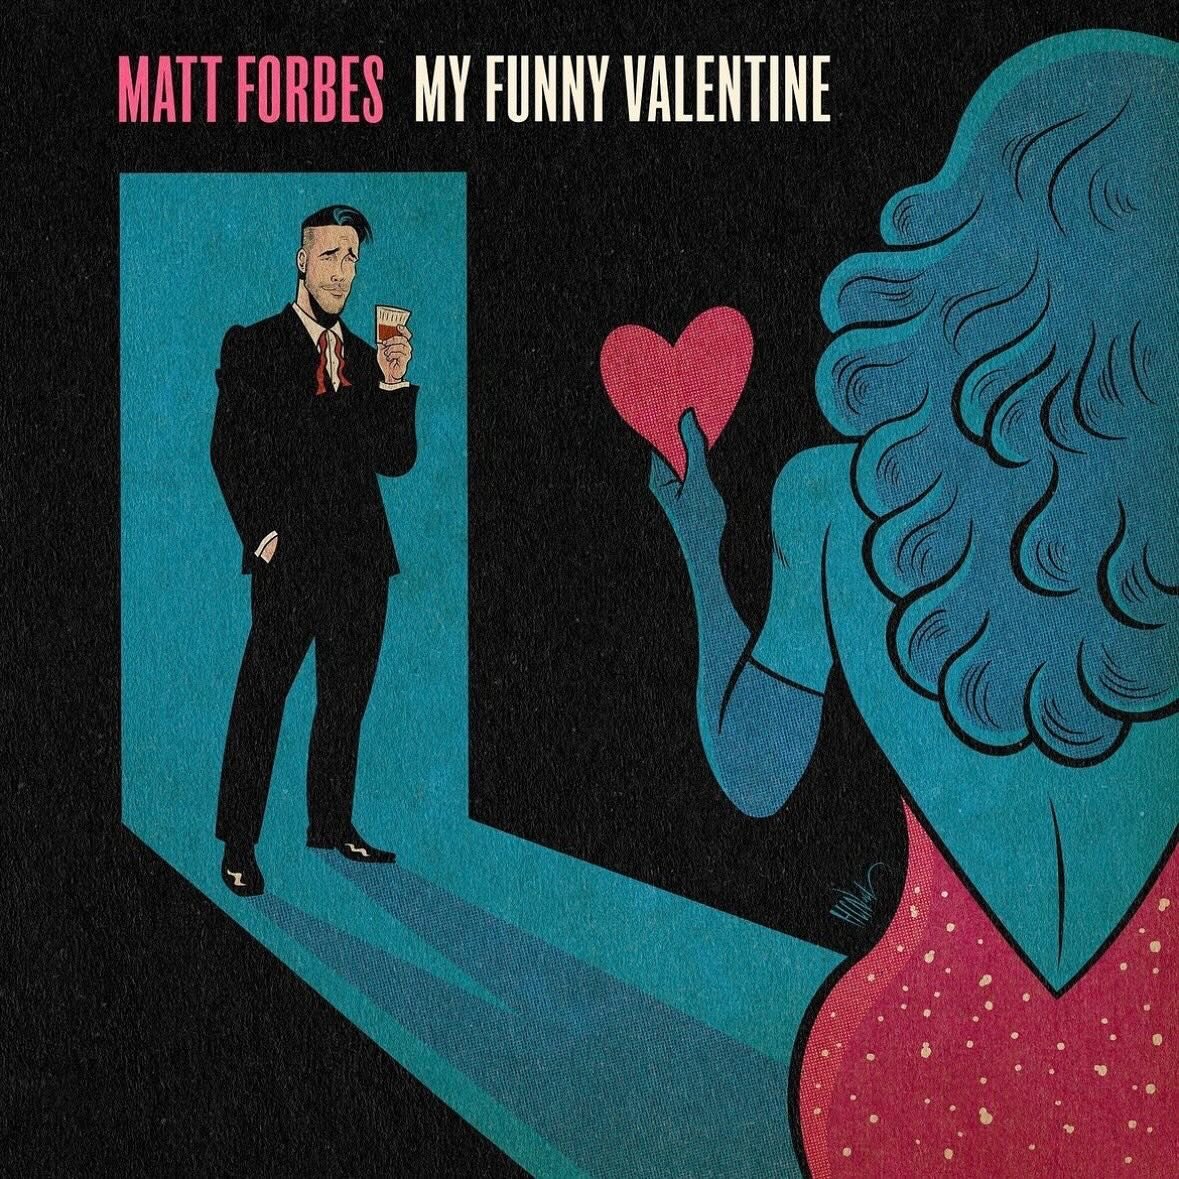 Matt Forbes&rsquo; new single &ldquo;My Funny Valentine&rdquo; was just released!

Rhythm section &amp; horns recorded by Gus and Phil at EastWest Studios. Justin recorded vocals &amp; vibraphone at Igloo studios 1 &amp; A. Mixed &amp; mastered by Ju